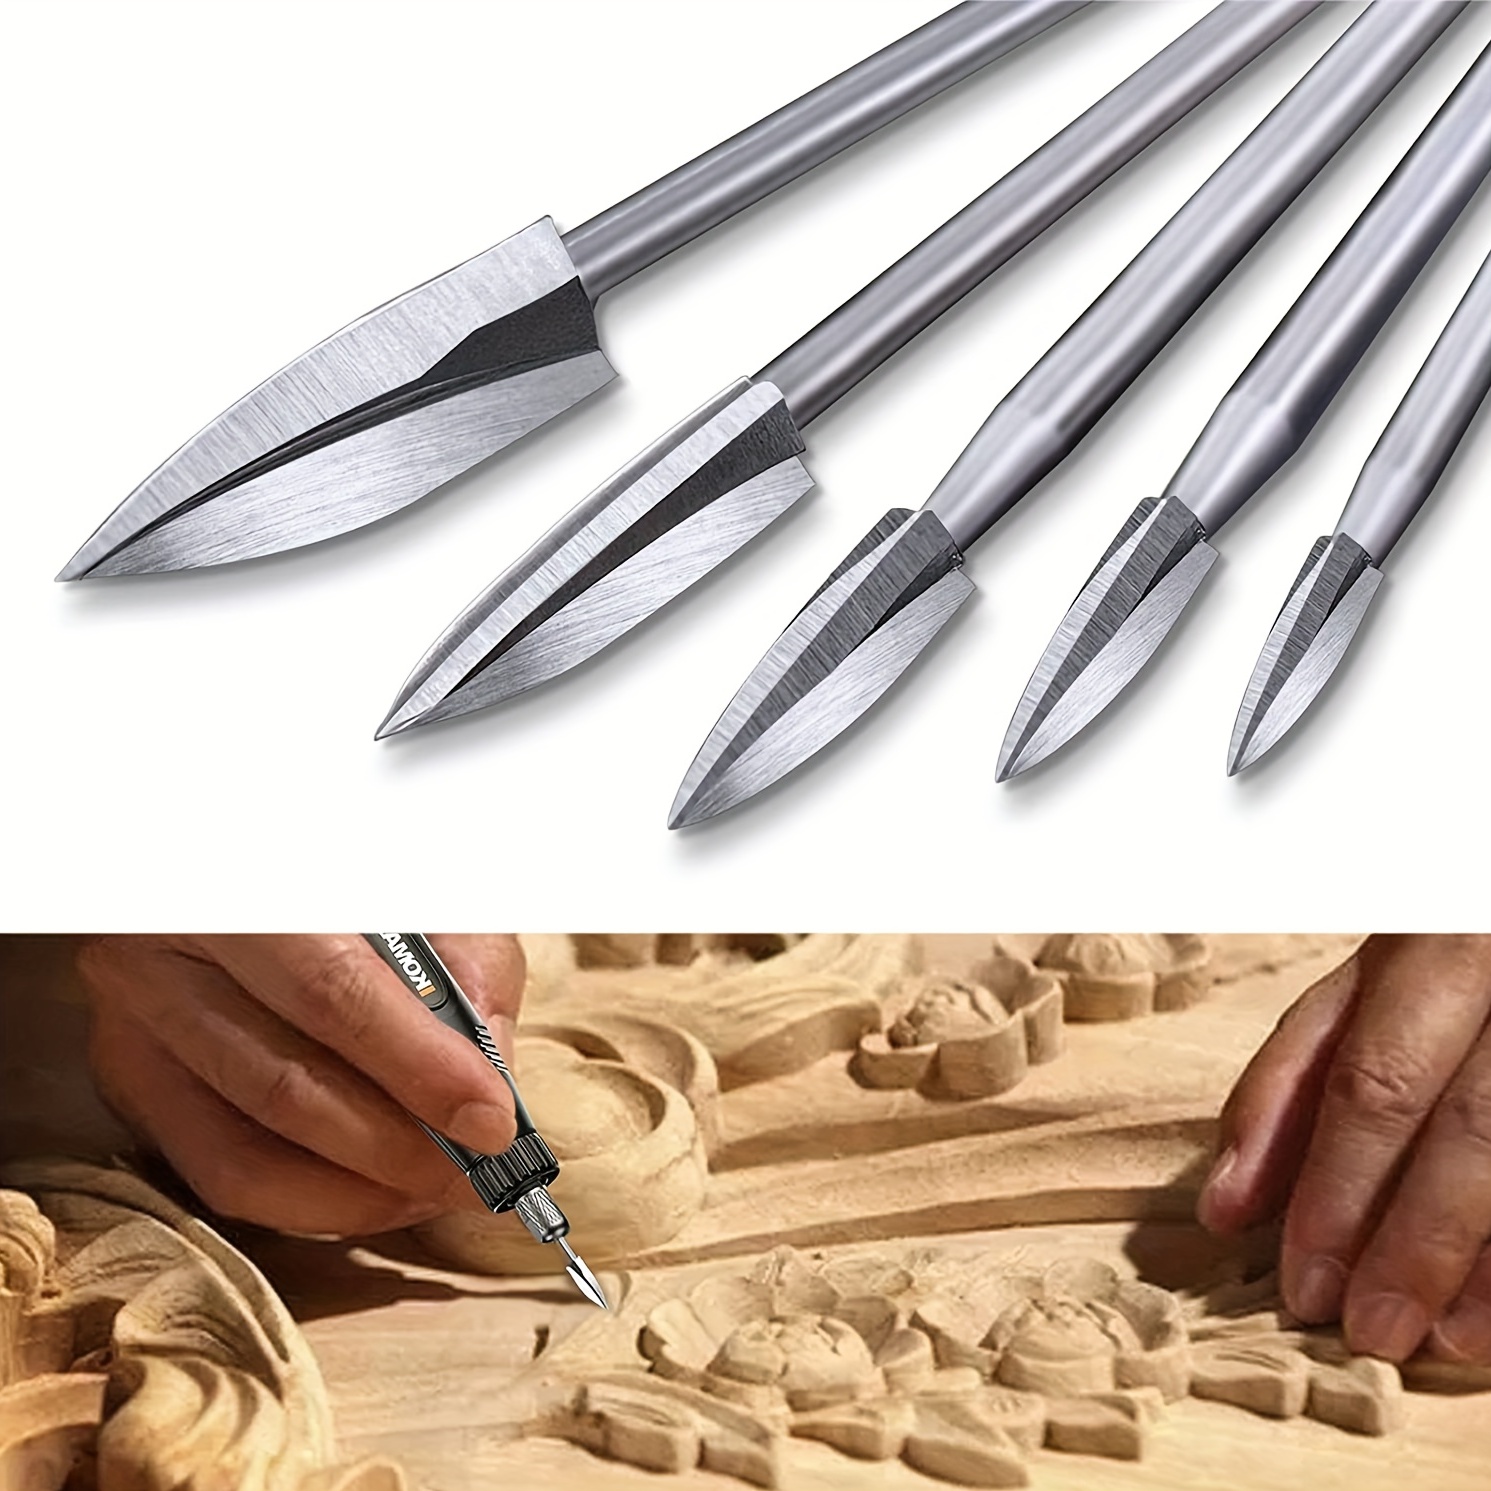 

5-piece Wood Carving Tool Set - Perfect For Woodworking, Engraving & Grinding - Universal Fitment For Rotary Tools!